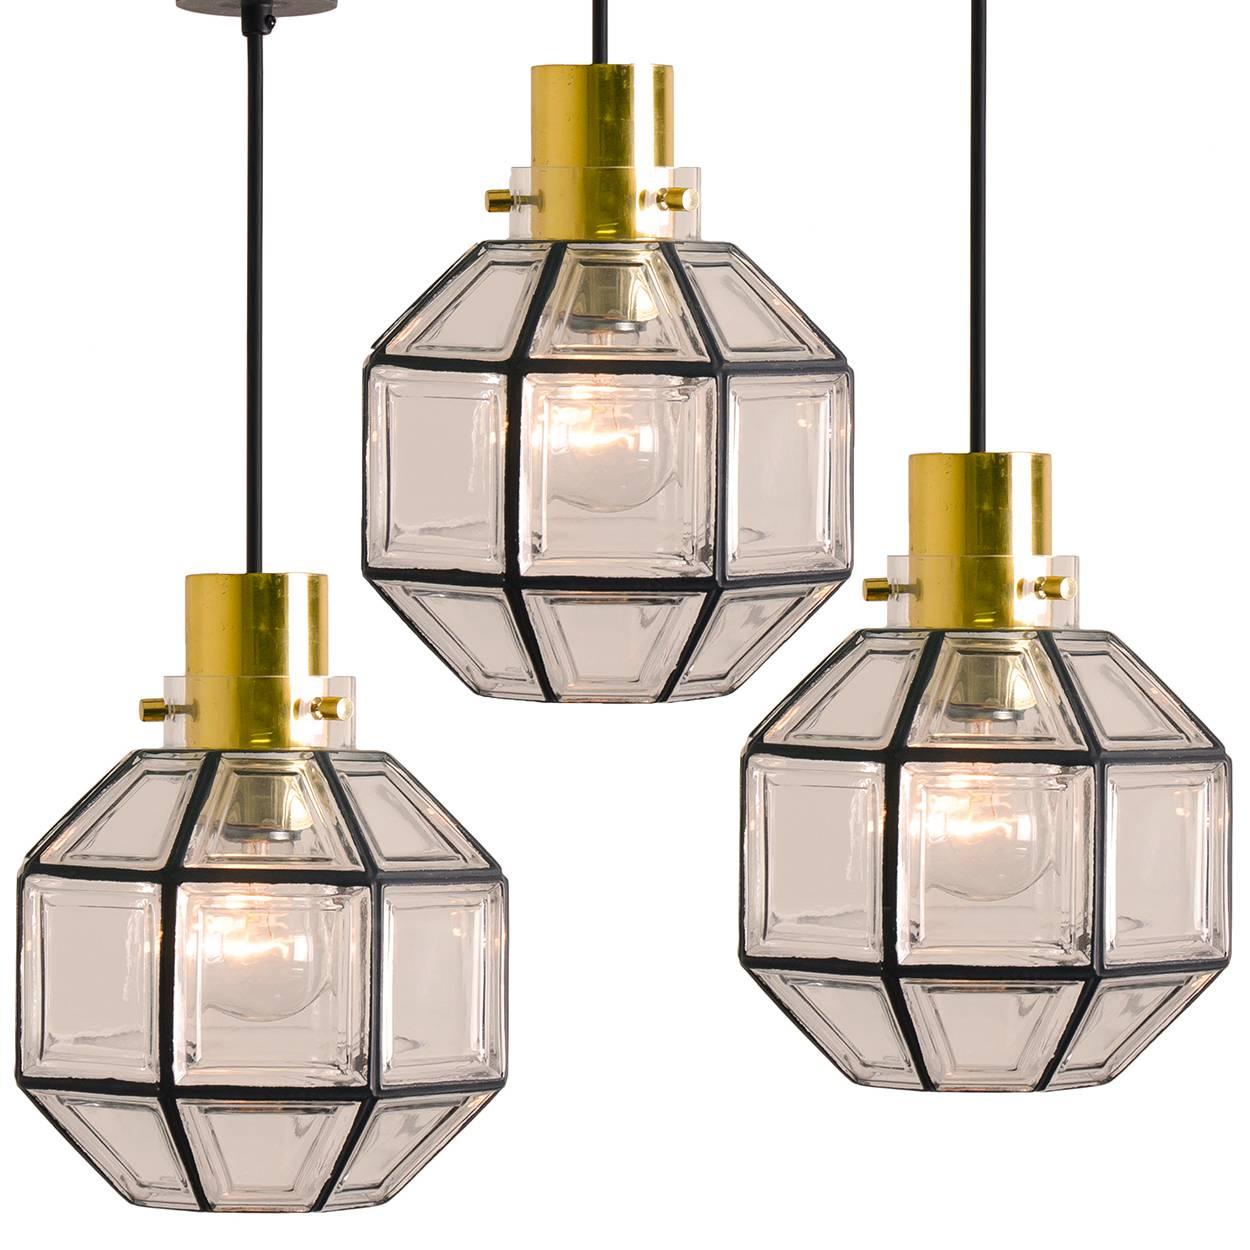 This beautiful set octagonal glass light fixtures were manufactured by Glashütte Limburg in Germany during the 1960s. Beautiful craftsmanship. Each lamp, made from elaborate clear glass, features one E27 socket and brass suspension.

Size of the